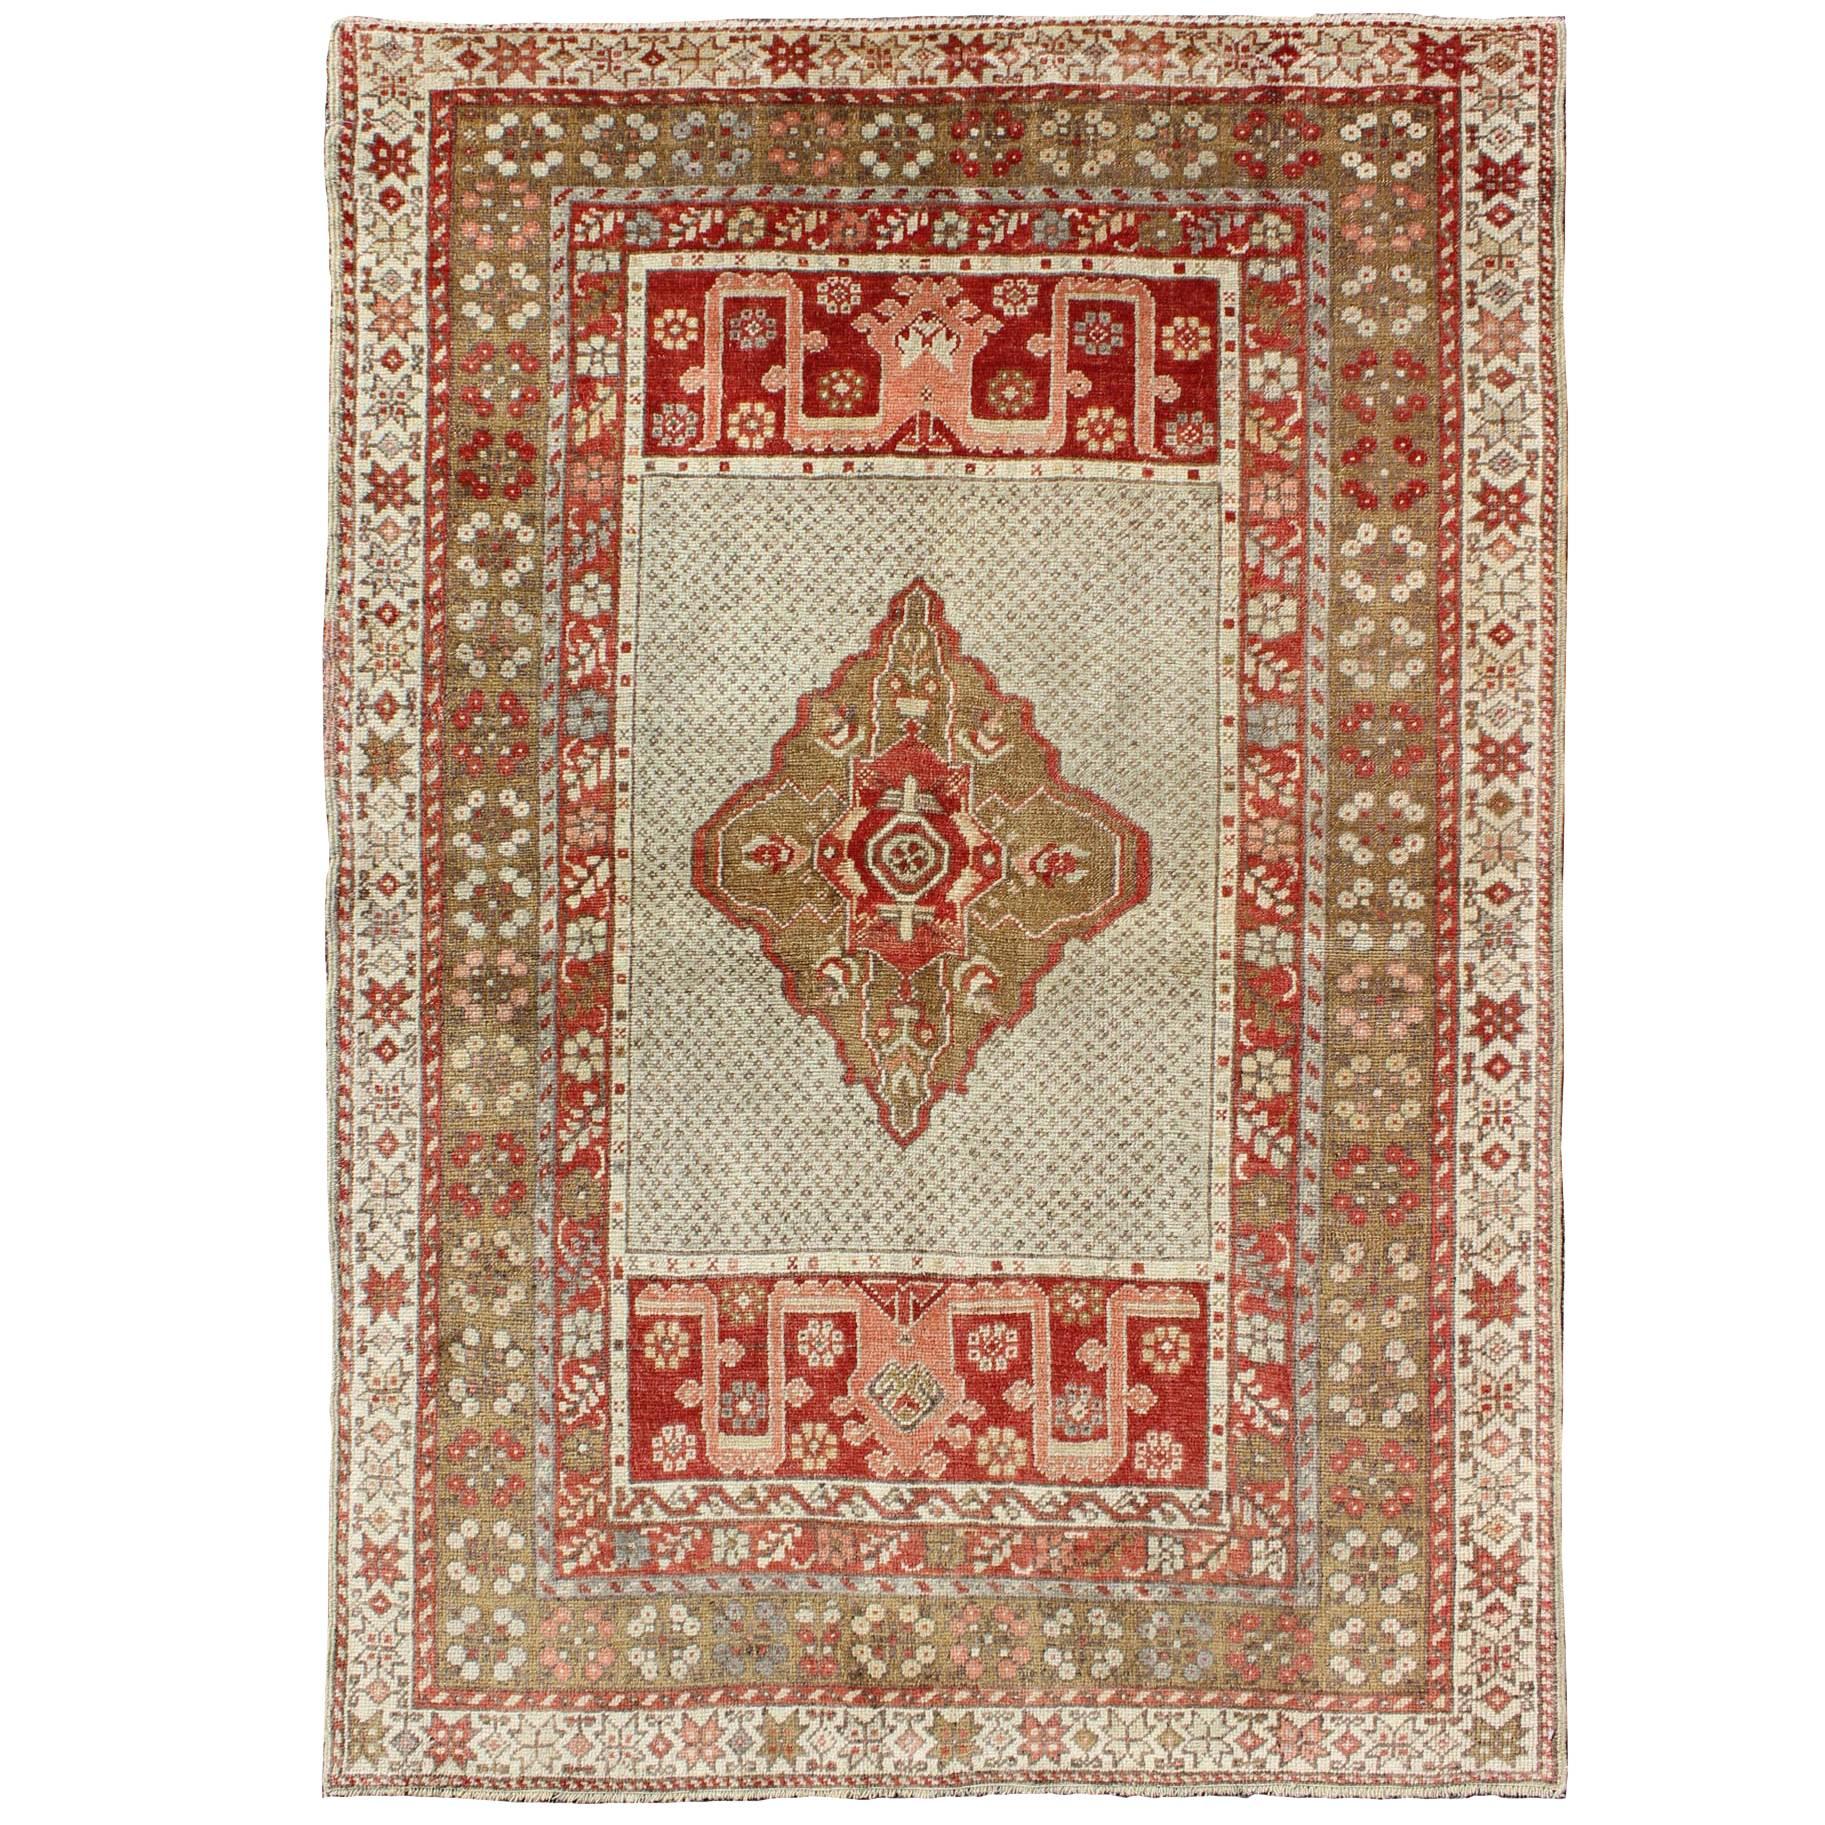  Antique Medallion Turkish Small Oushak Carpet in Various Green Tones & Red For Sale